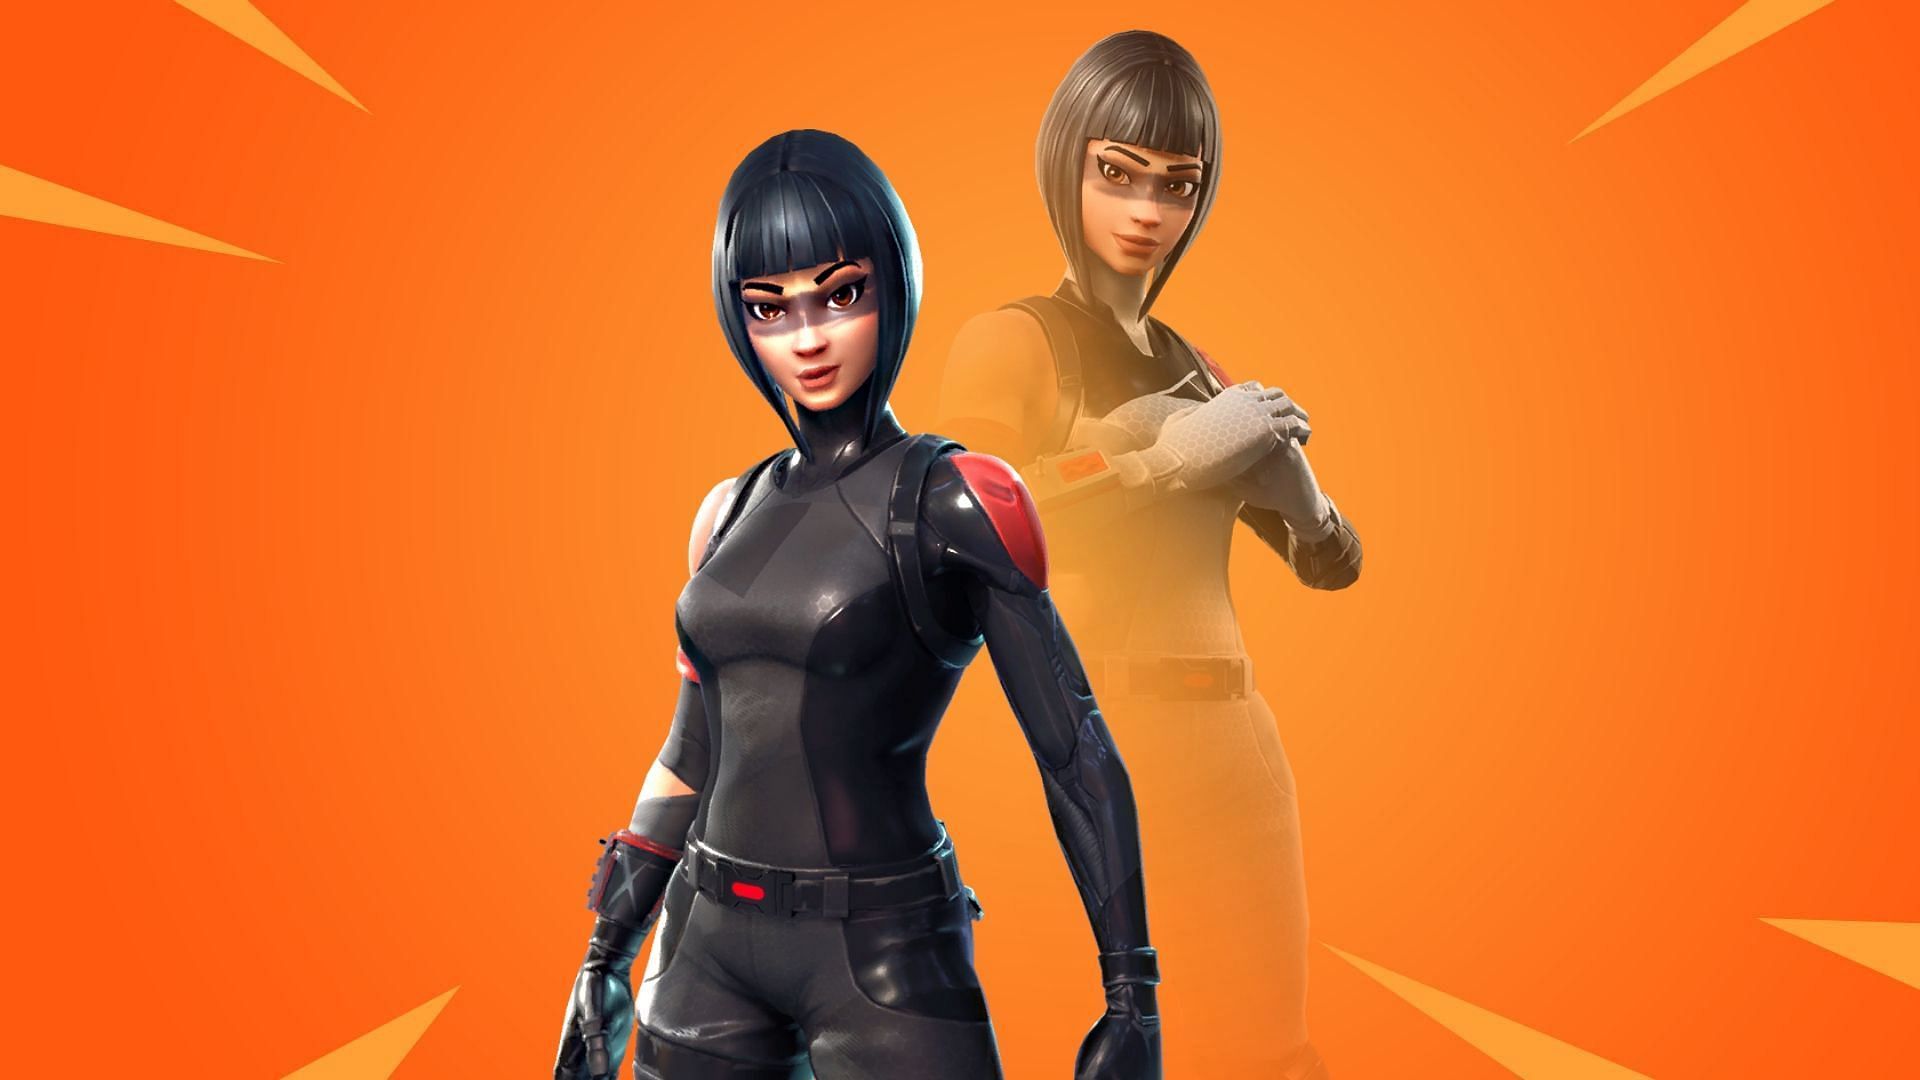 Shadow Ops will be making her NPC debut tomorrow with the update. Image via Epic Games